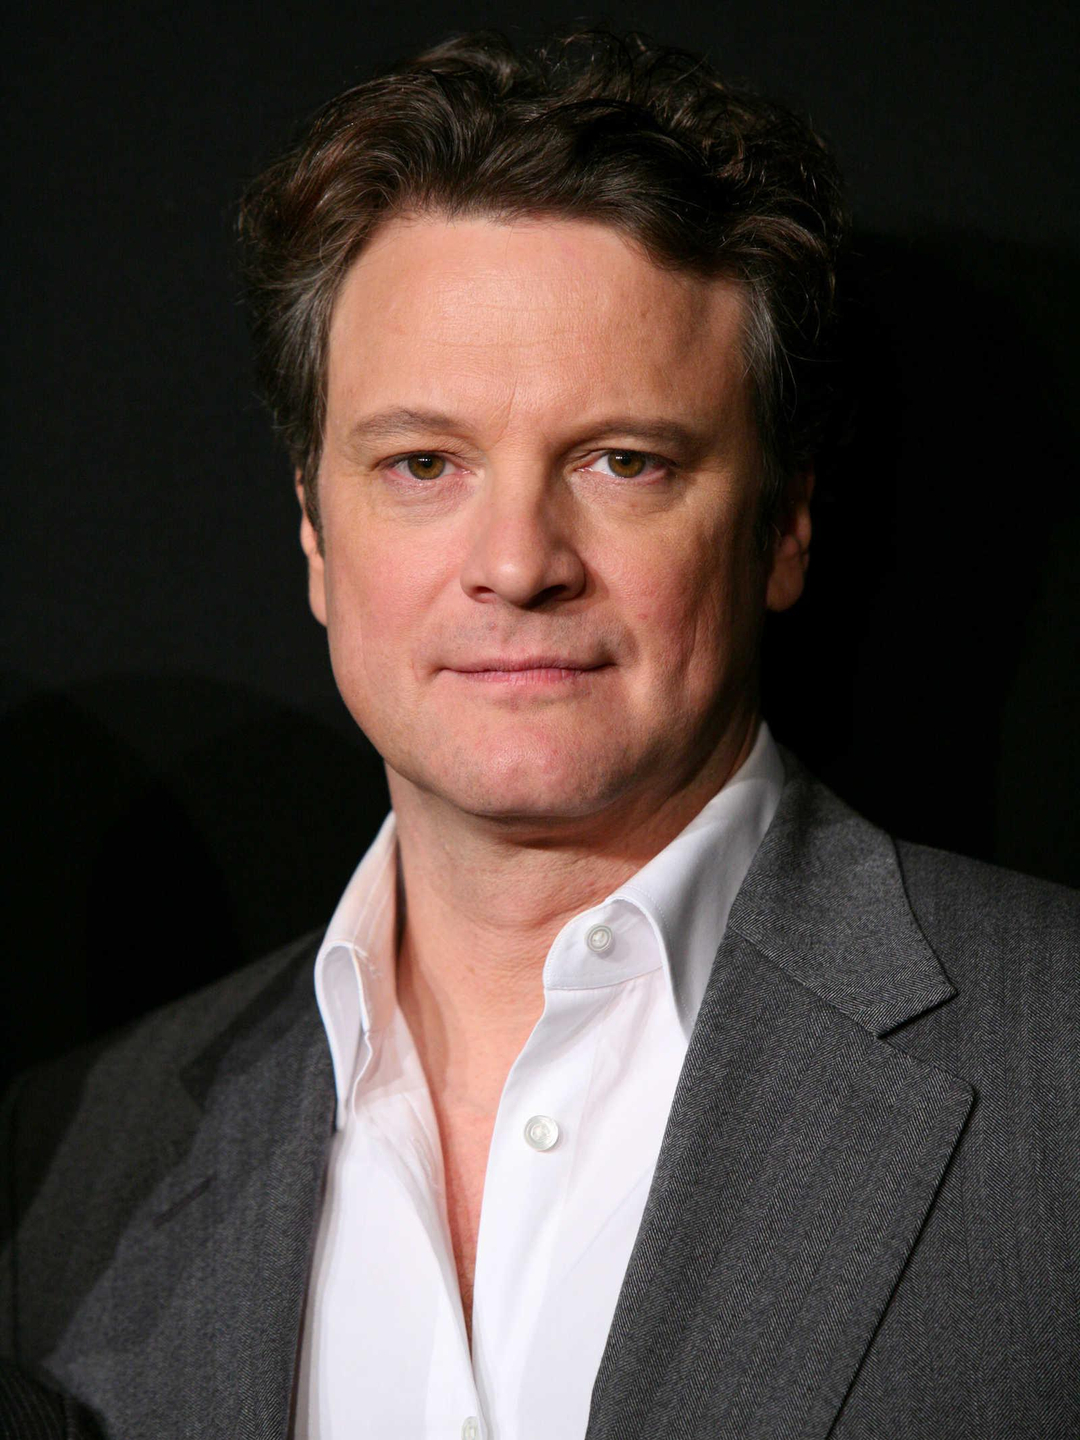 Colin Firth who is his father